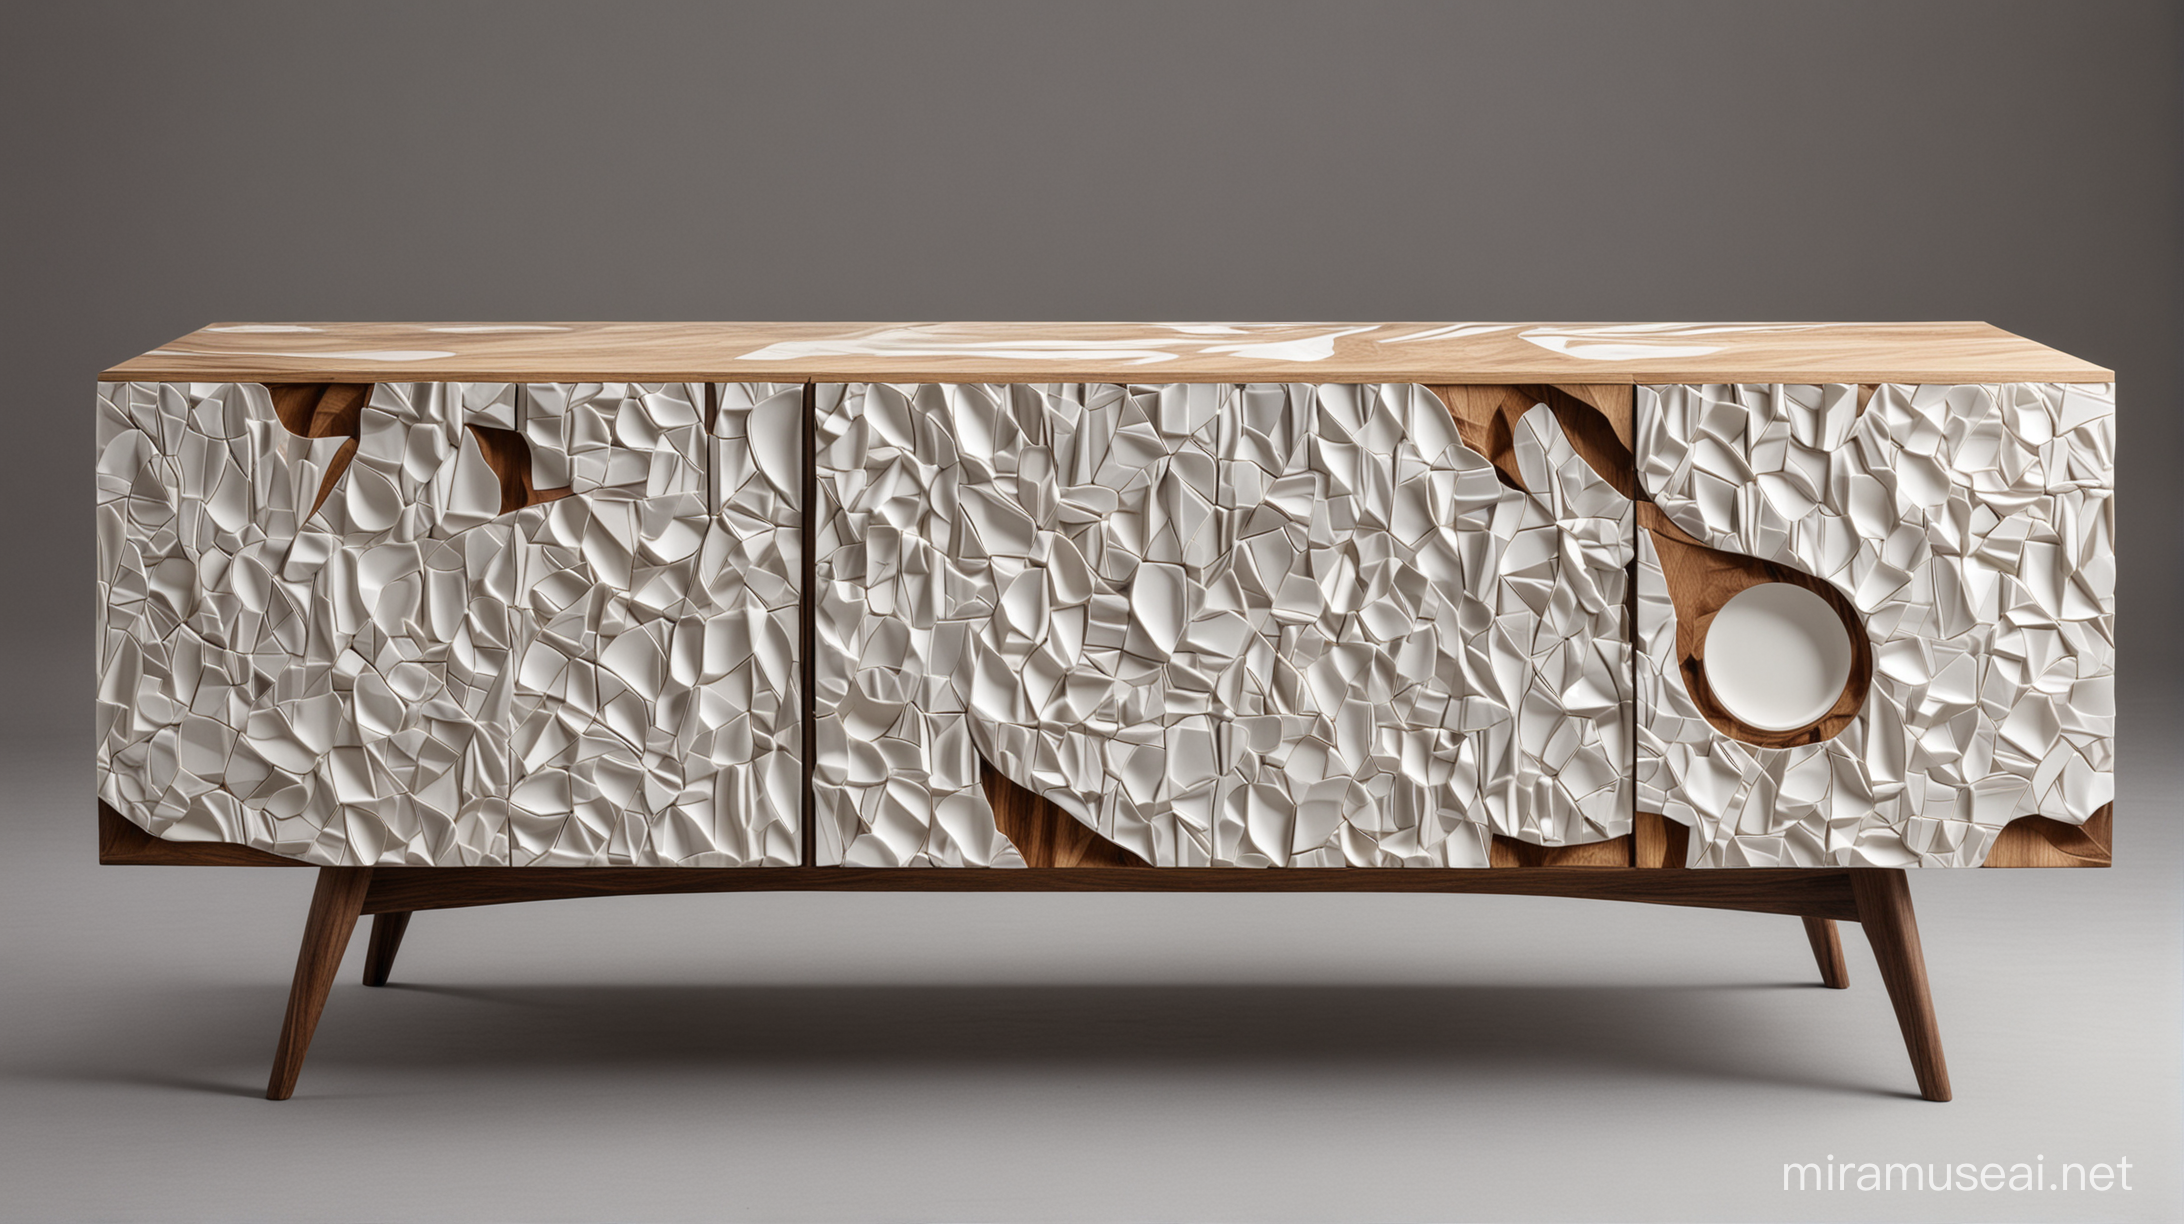 create a cover photo  process of creating 
 bespoke modern
 furniture from ceramic metal and wood abstract very creative
